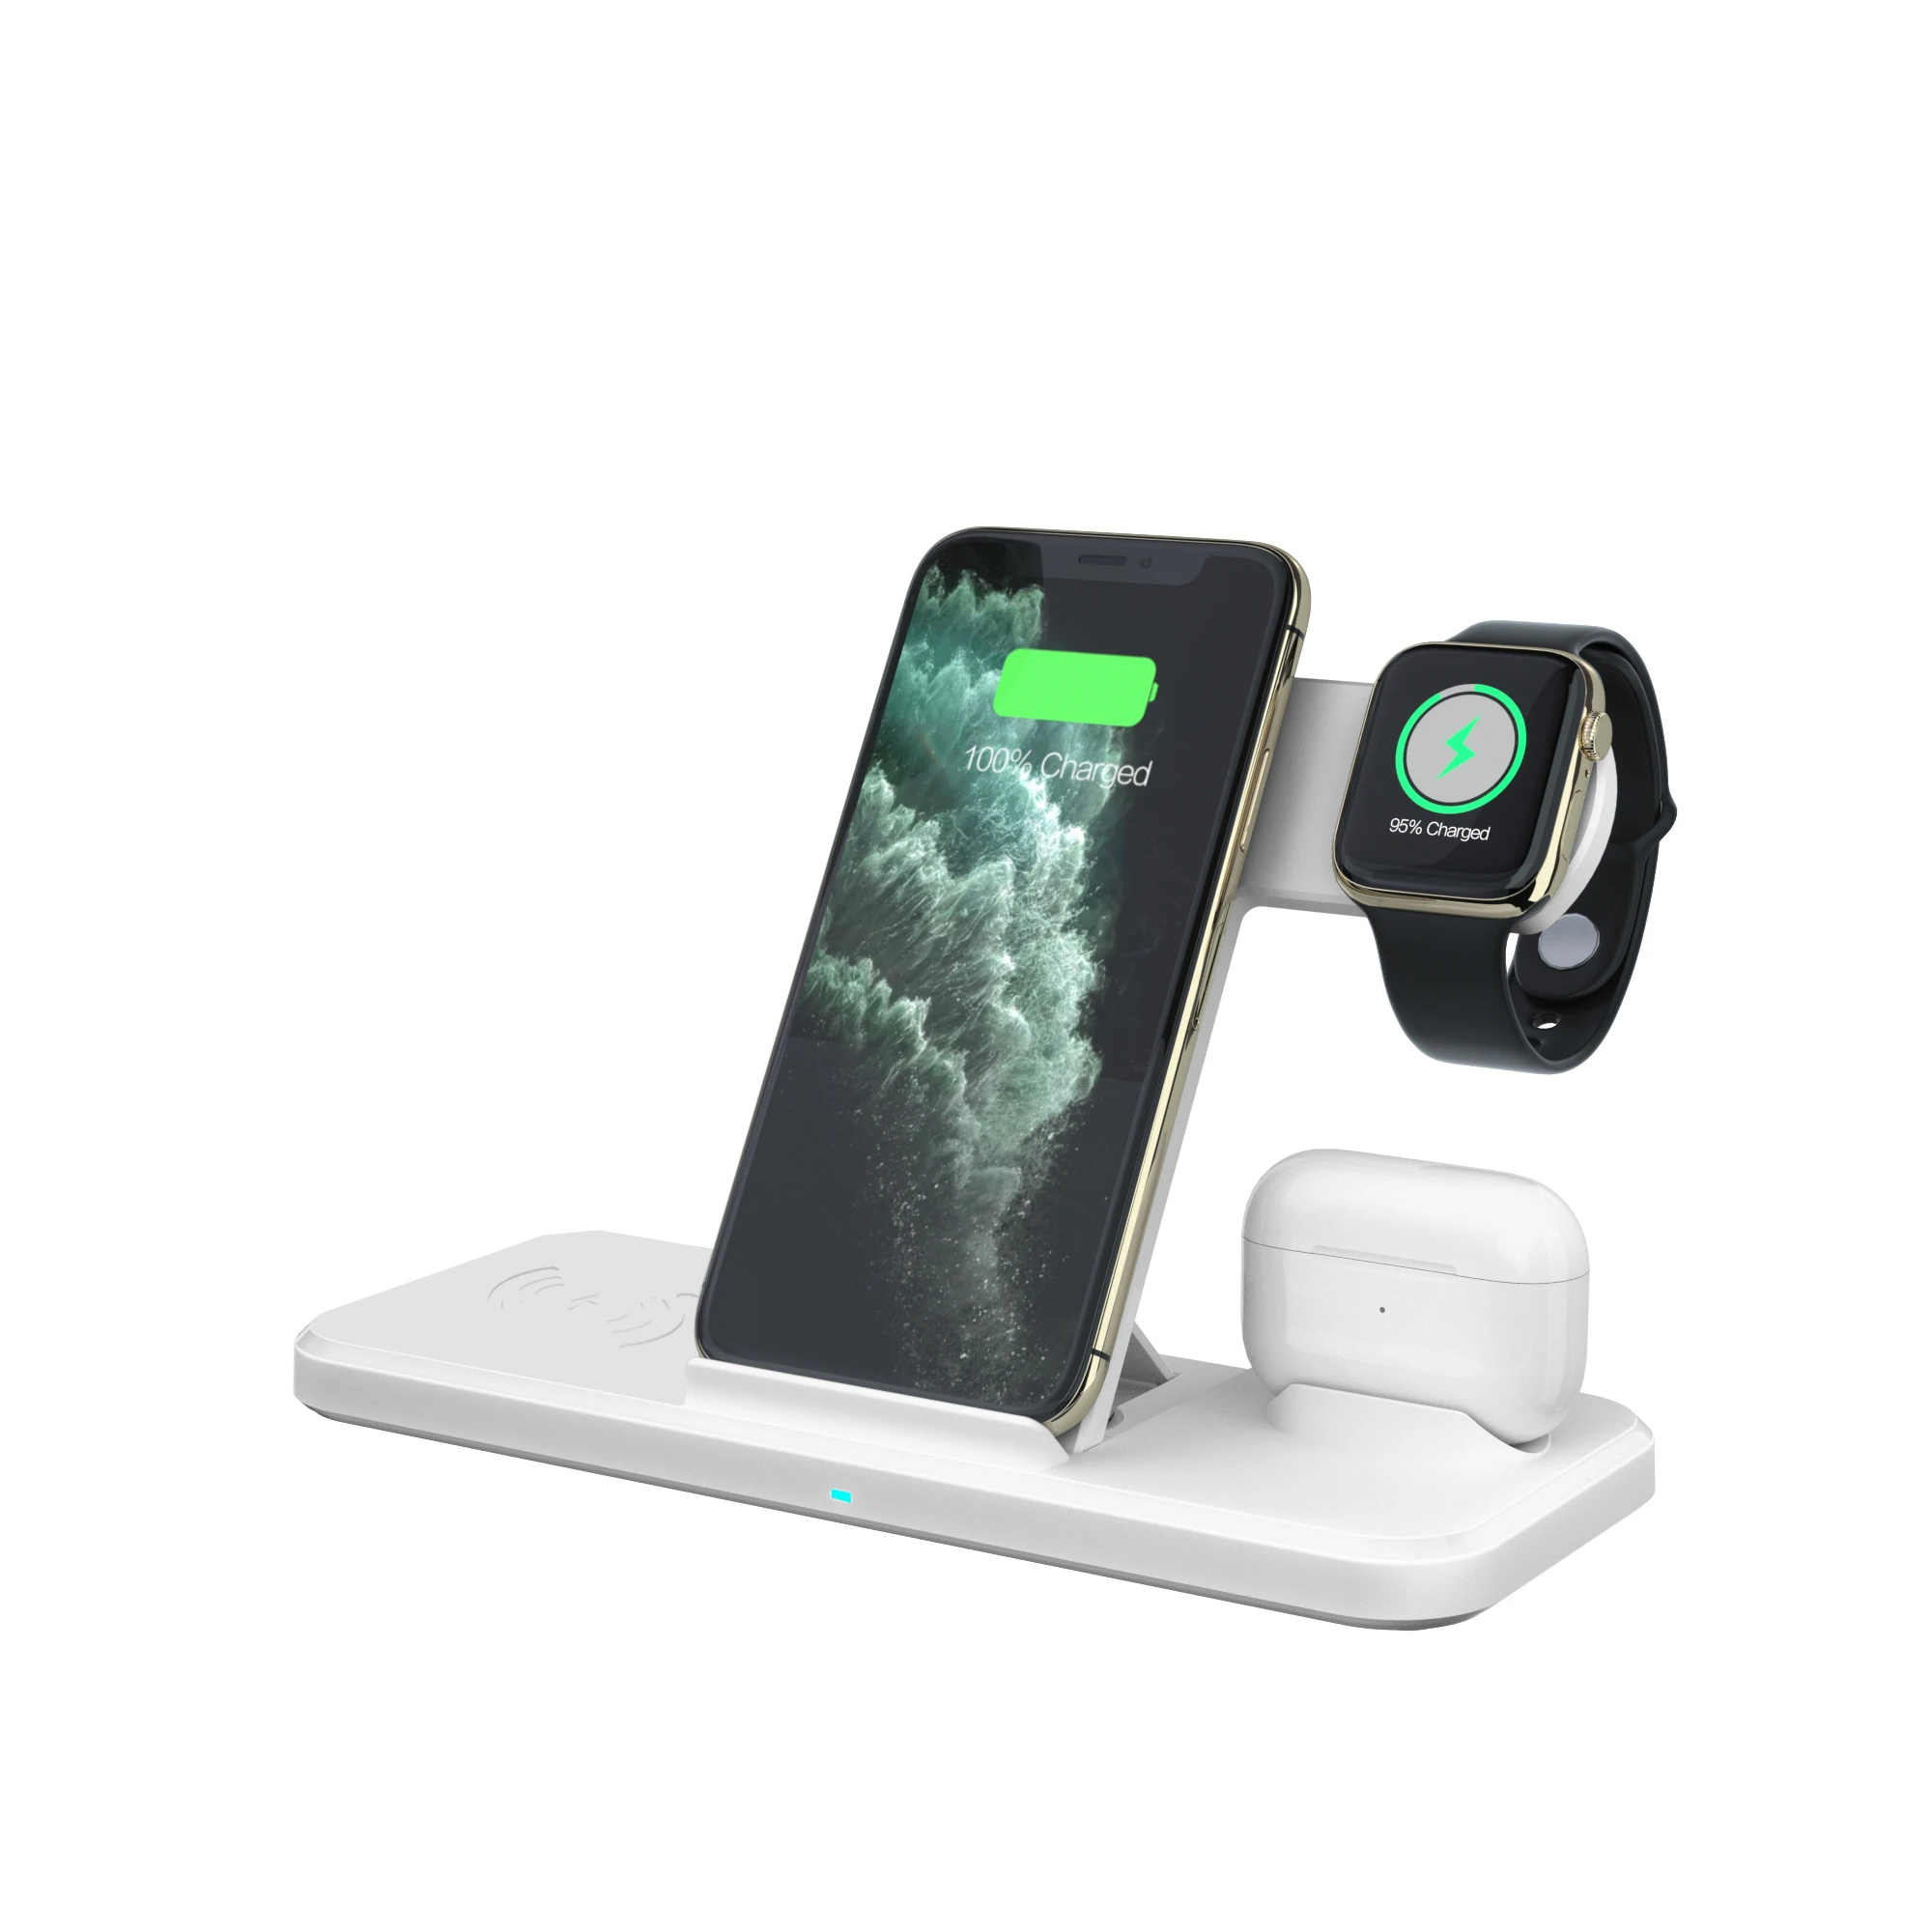 

Portable Wireless High Speed Charging Docking Station Stand For iPhone Watch Earbud Adapter 15w Fast Wireless Charger 3 in 1